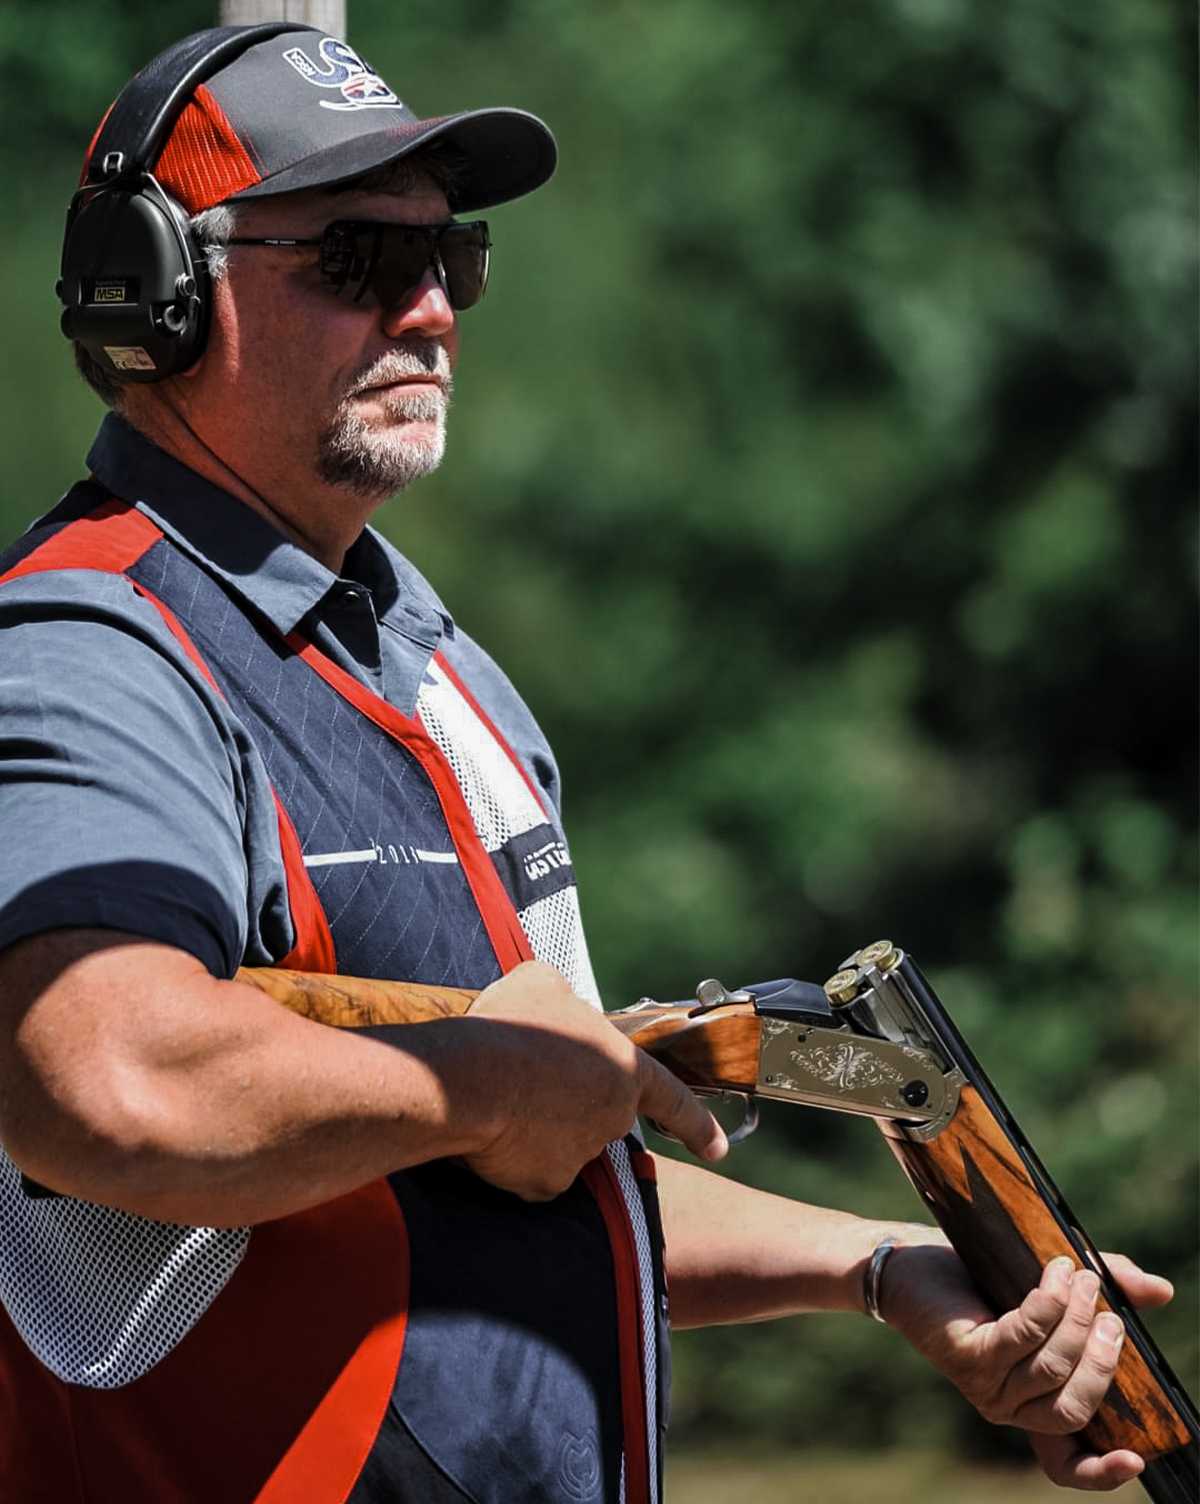 Three-time National Sporting Clays champion Andy Duffy shooting a German-made Krieghoff K-80. The K-80 is a direct descendent of Remington’s Model 32, a gun intended to compete with Browning’s Superposed, but introduced in the depths of the Great Depression.